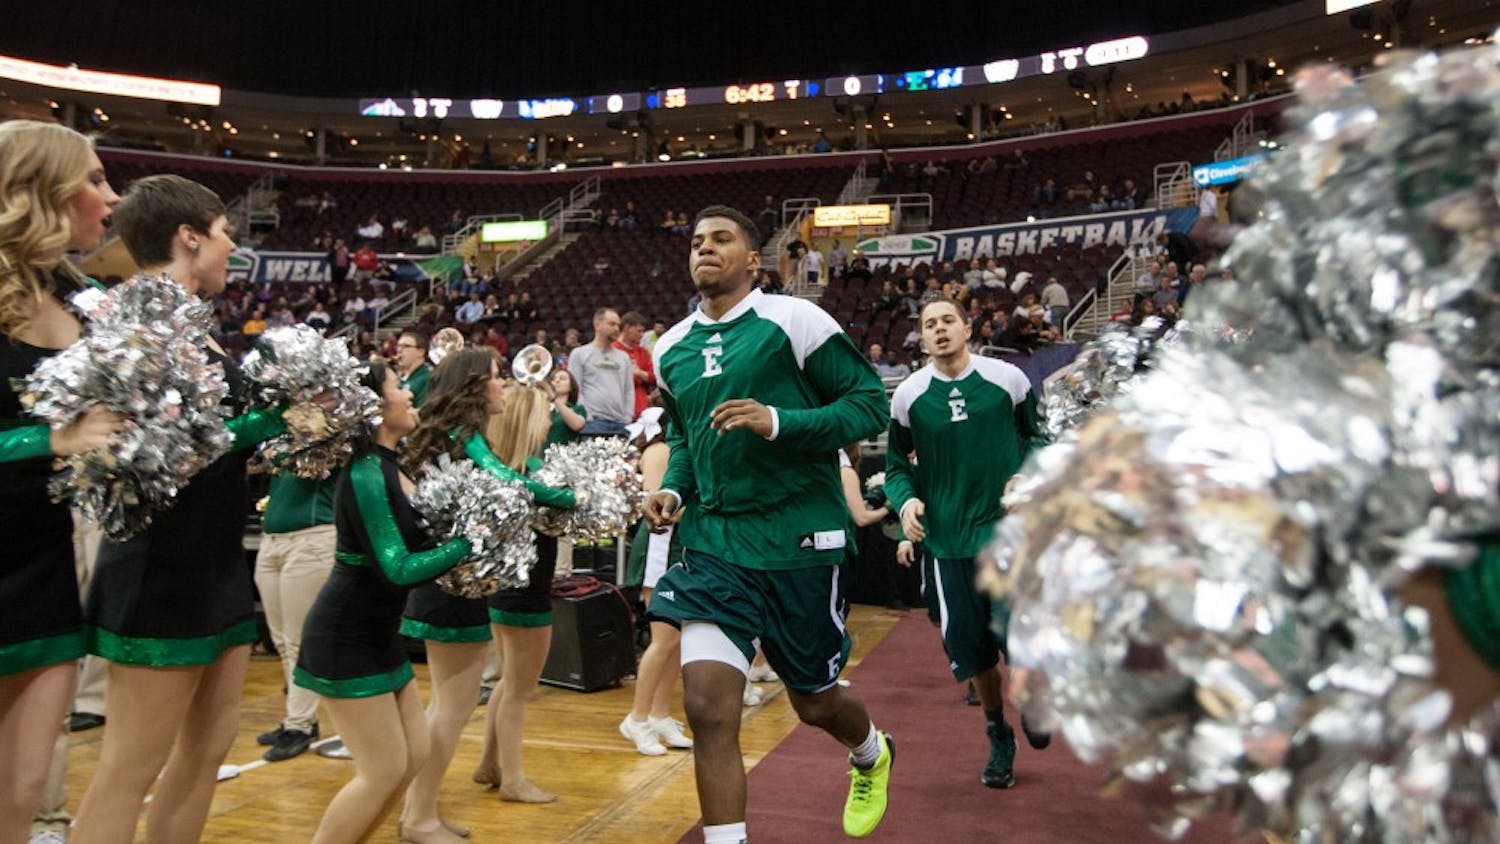 Eastern Michigan guard Jalen Ross runs onto the court before the Eagles took on Toledo in the semifinal round of the Mac Tournament Friday night.